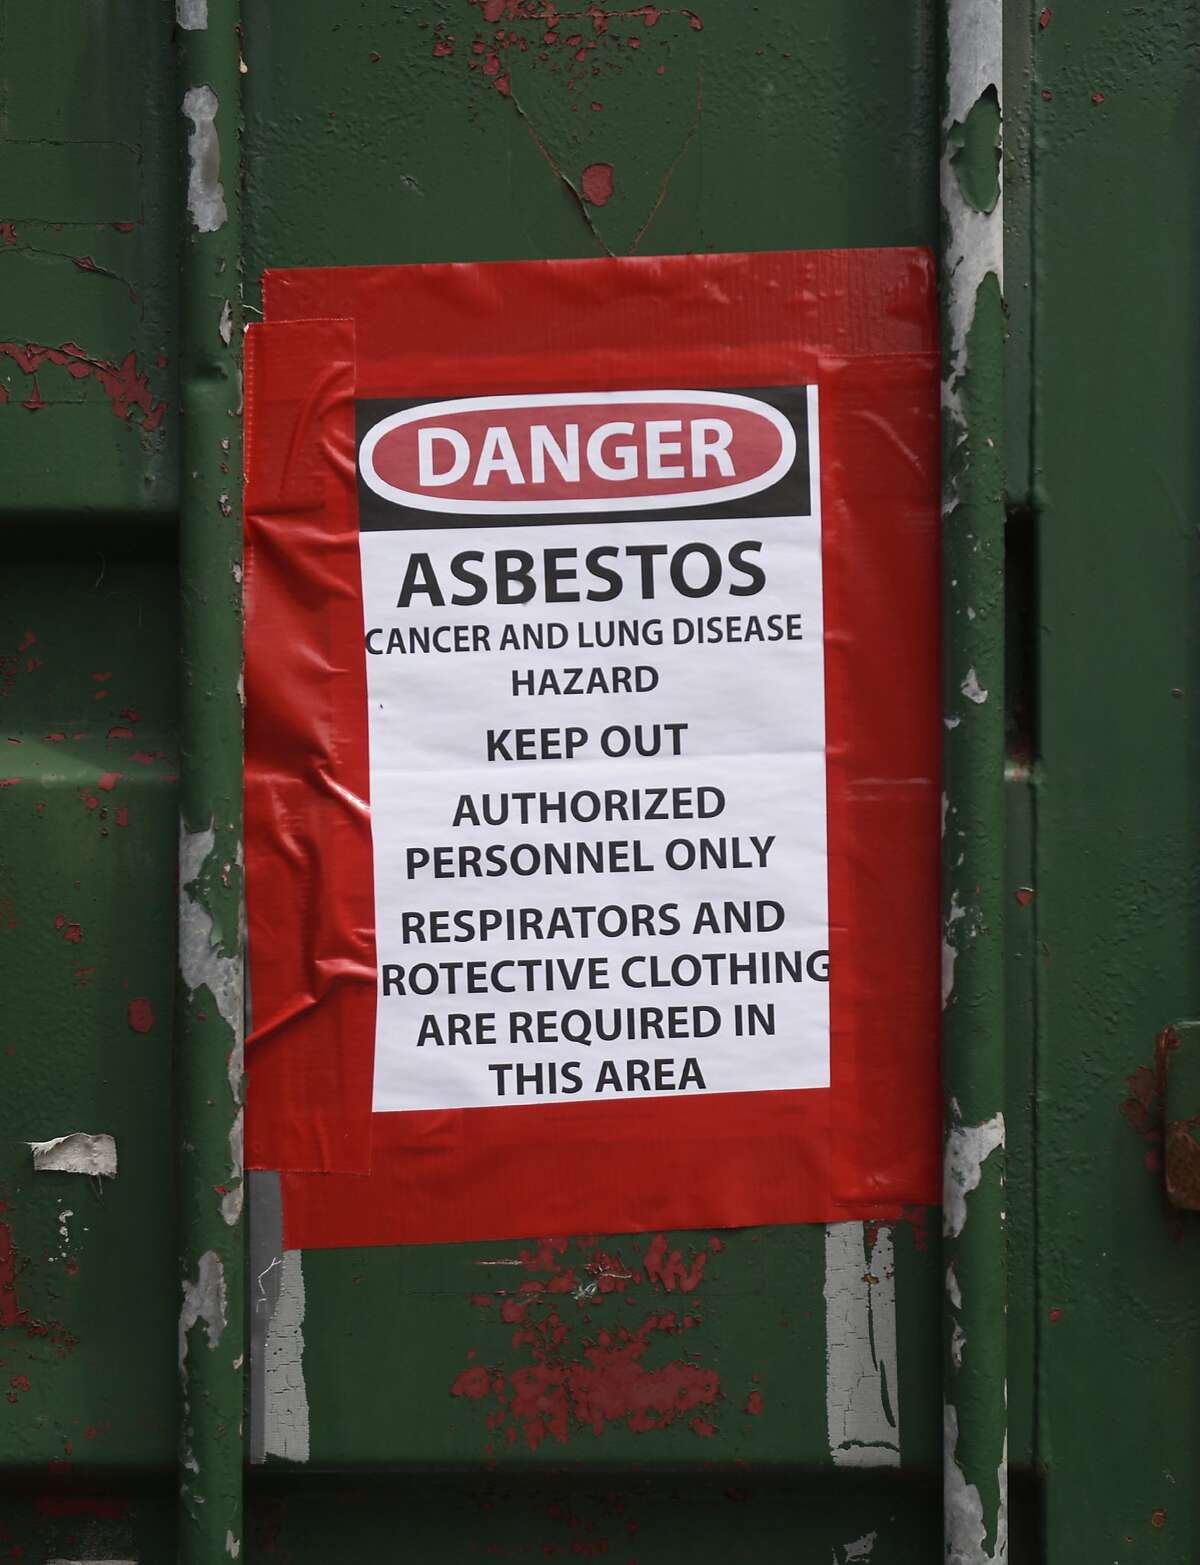 An asbestos warning sign hangs on a dumpster outside Julian Curtiss School in Greenwich, Conn. Monday, Aug. 3, 2015. The school is currently having asbestos removed from some of its classrooms.